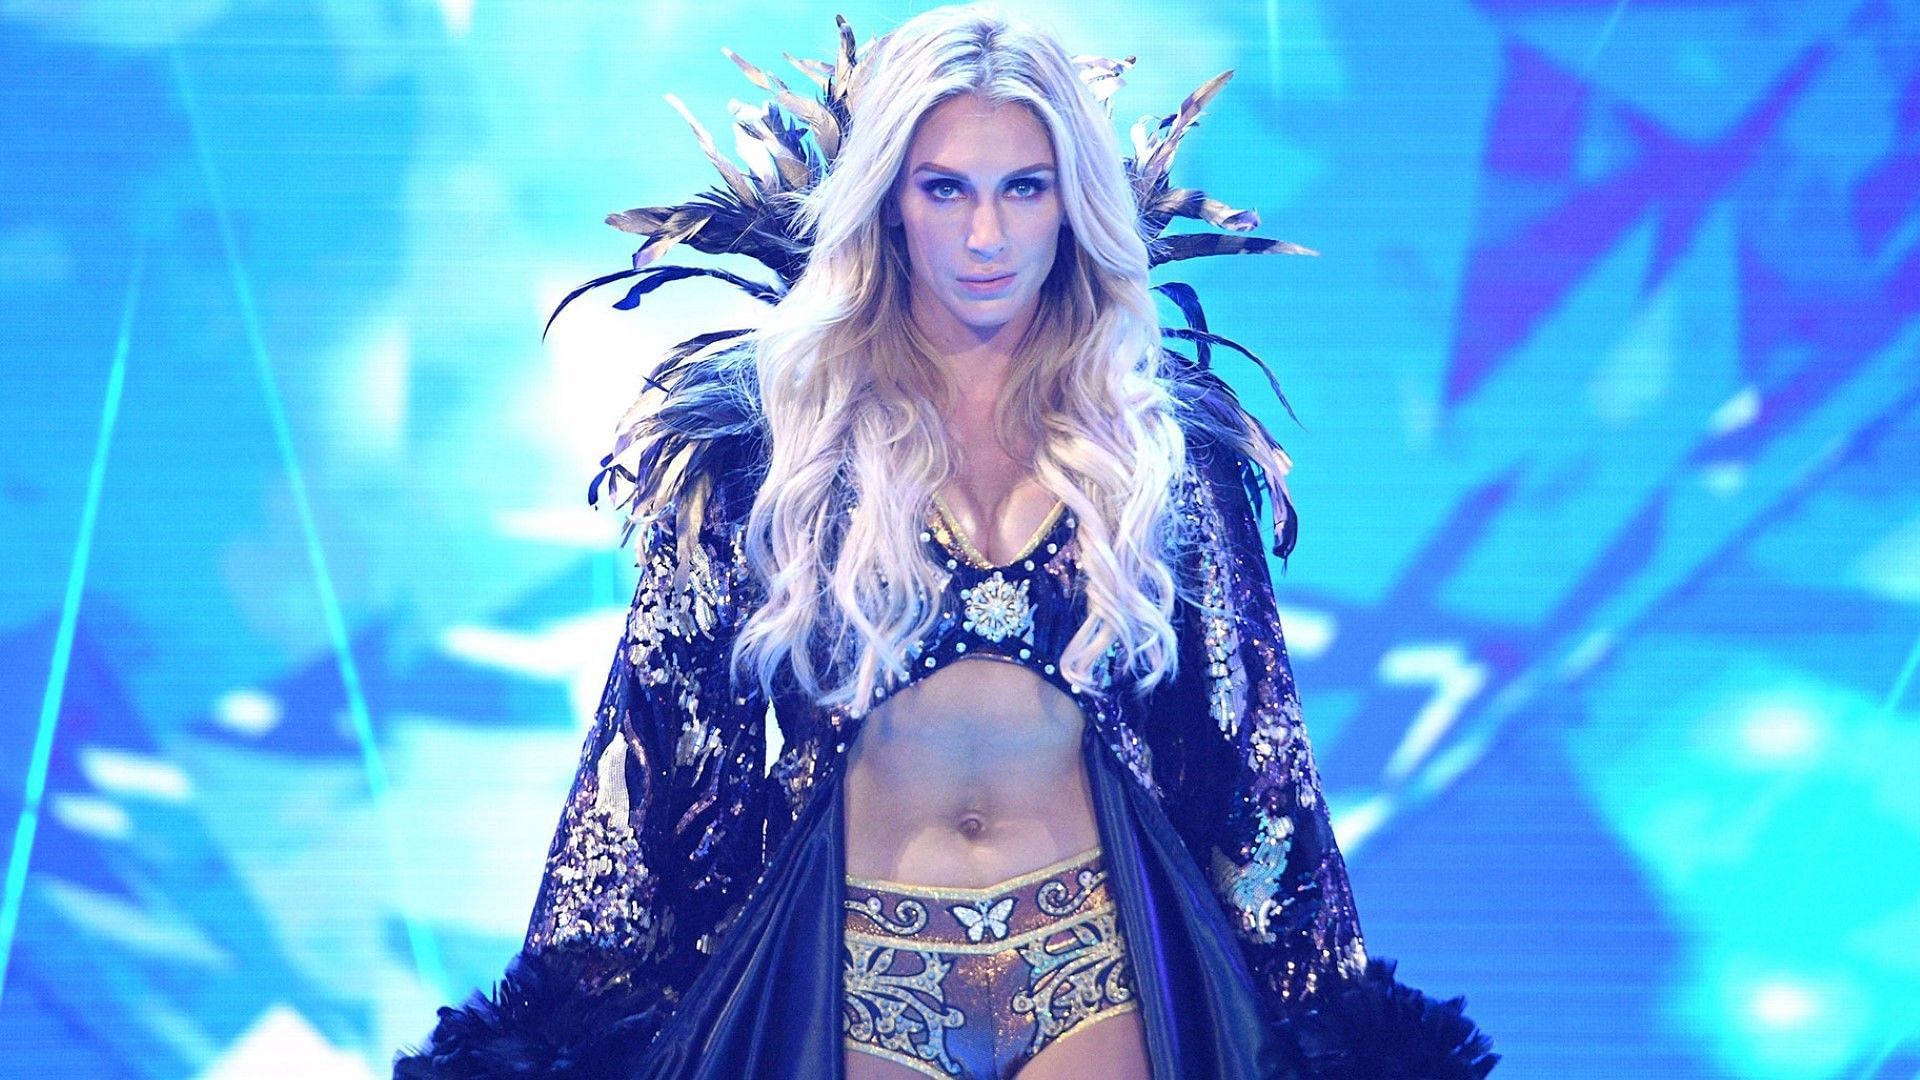 Charlotte Flair heads to the ring on WWE SmackDown